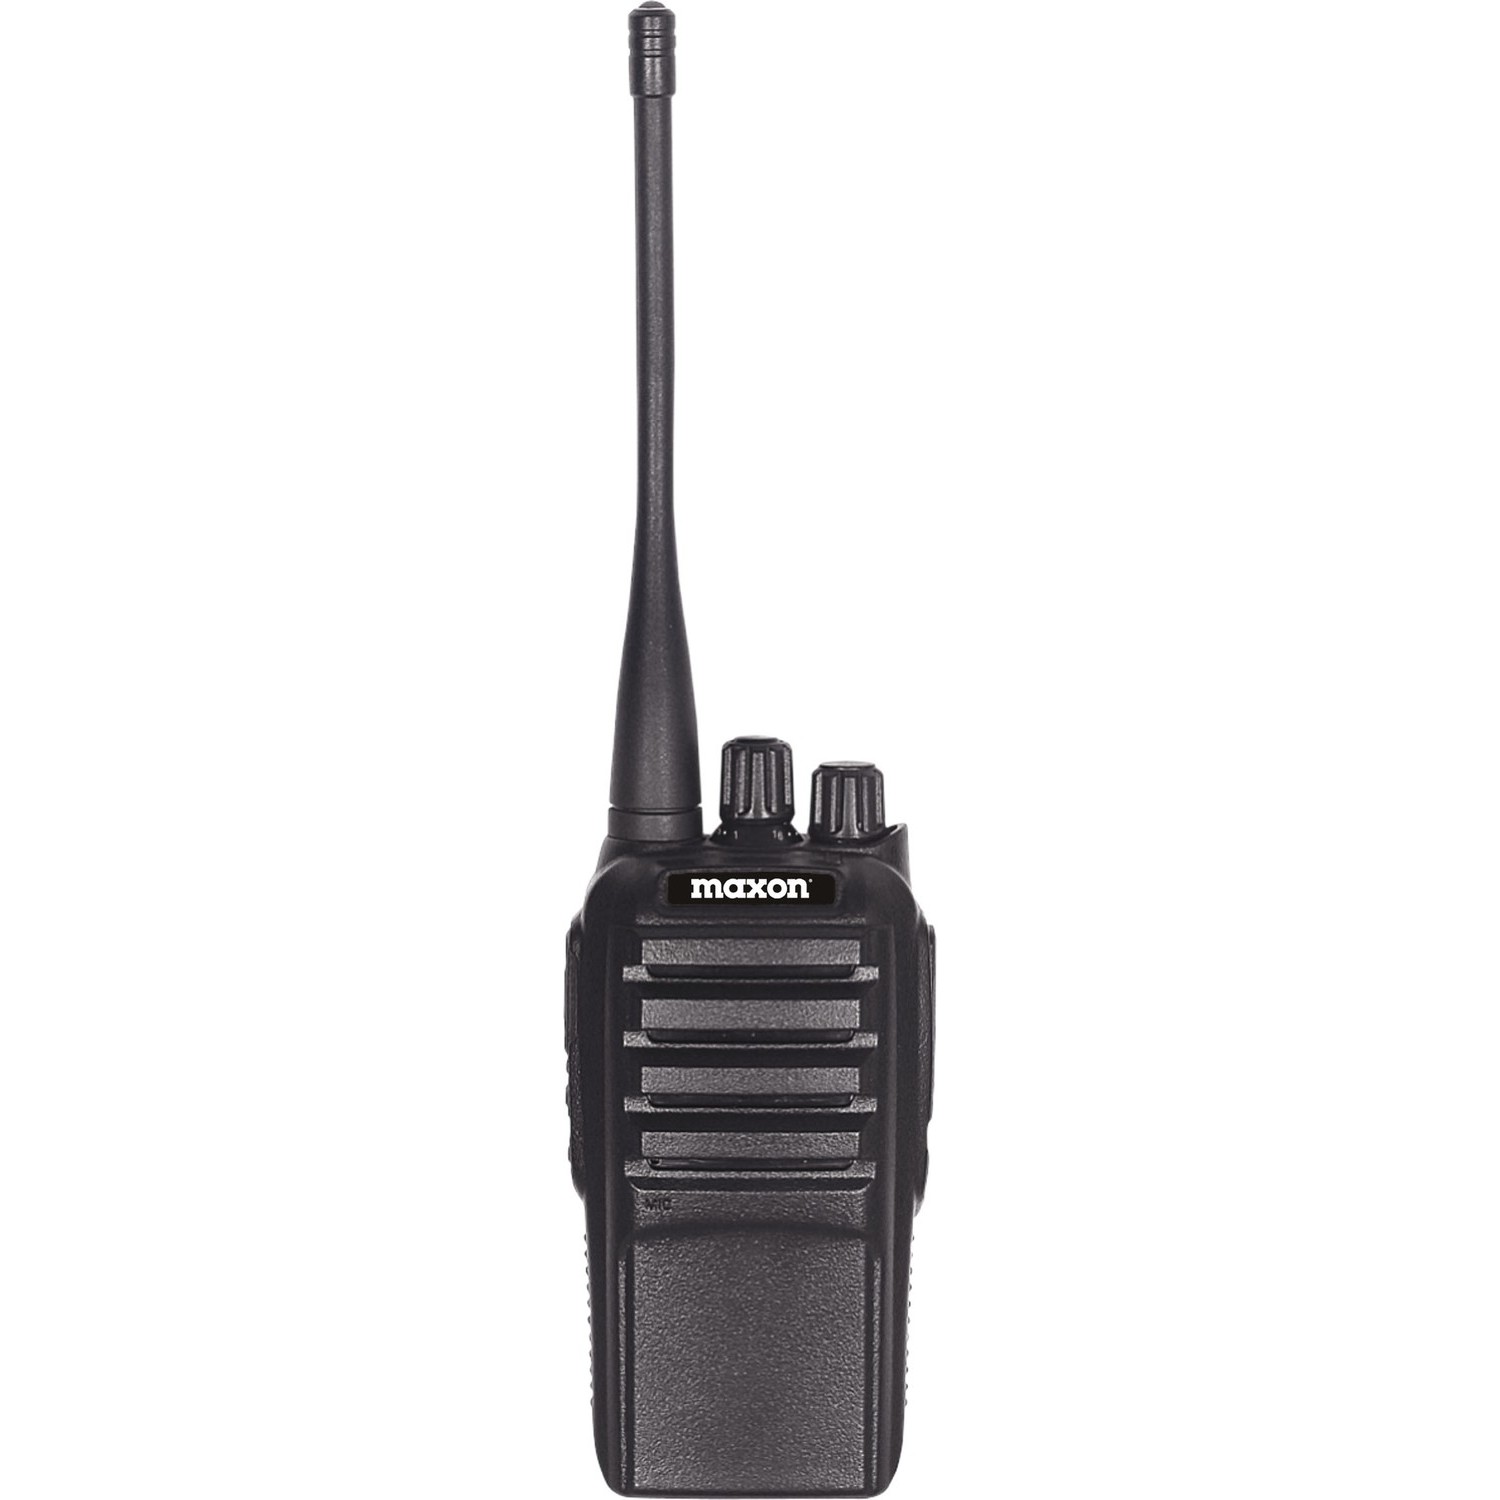 Maxon - Spartan 136-174 Mhz Vhf 5 Watt 16 Channel Professional Handheld Radio With Vox, Ctss/Dcs With Rechargeable Battery & Des